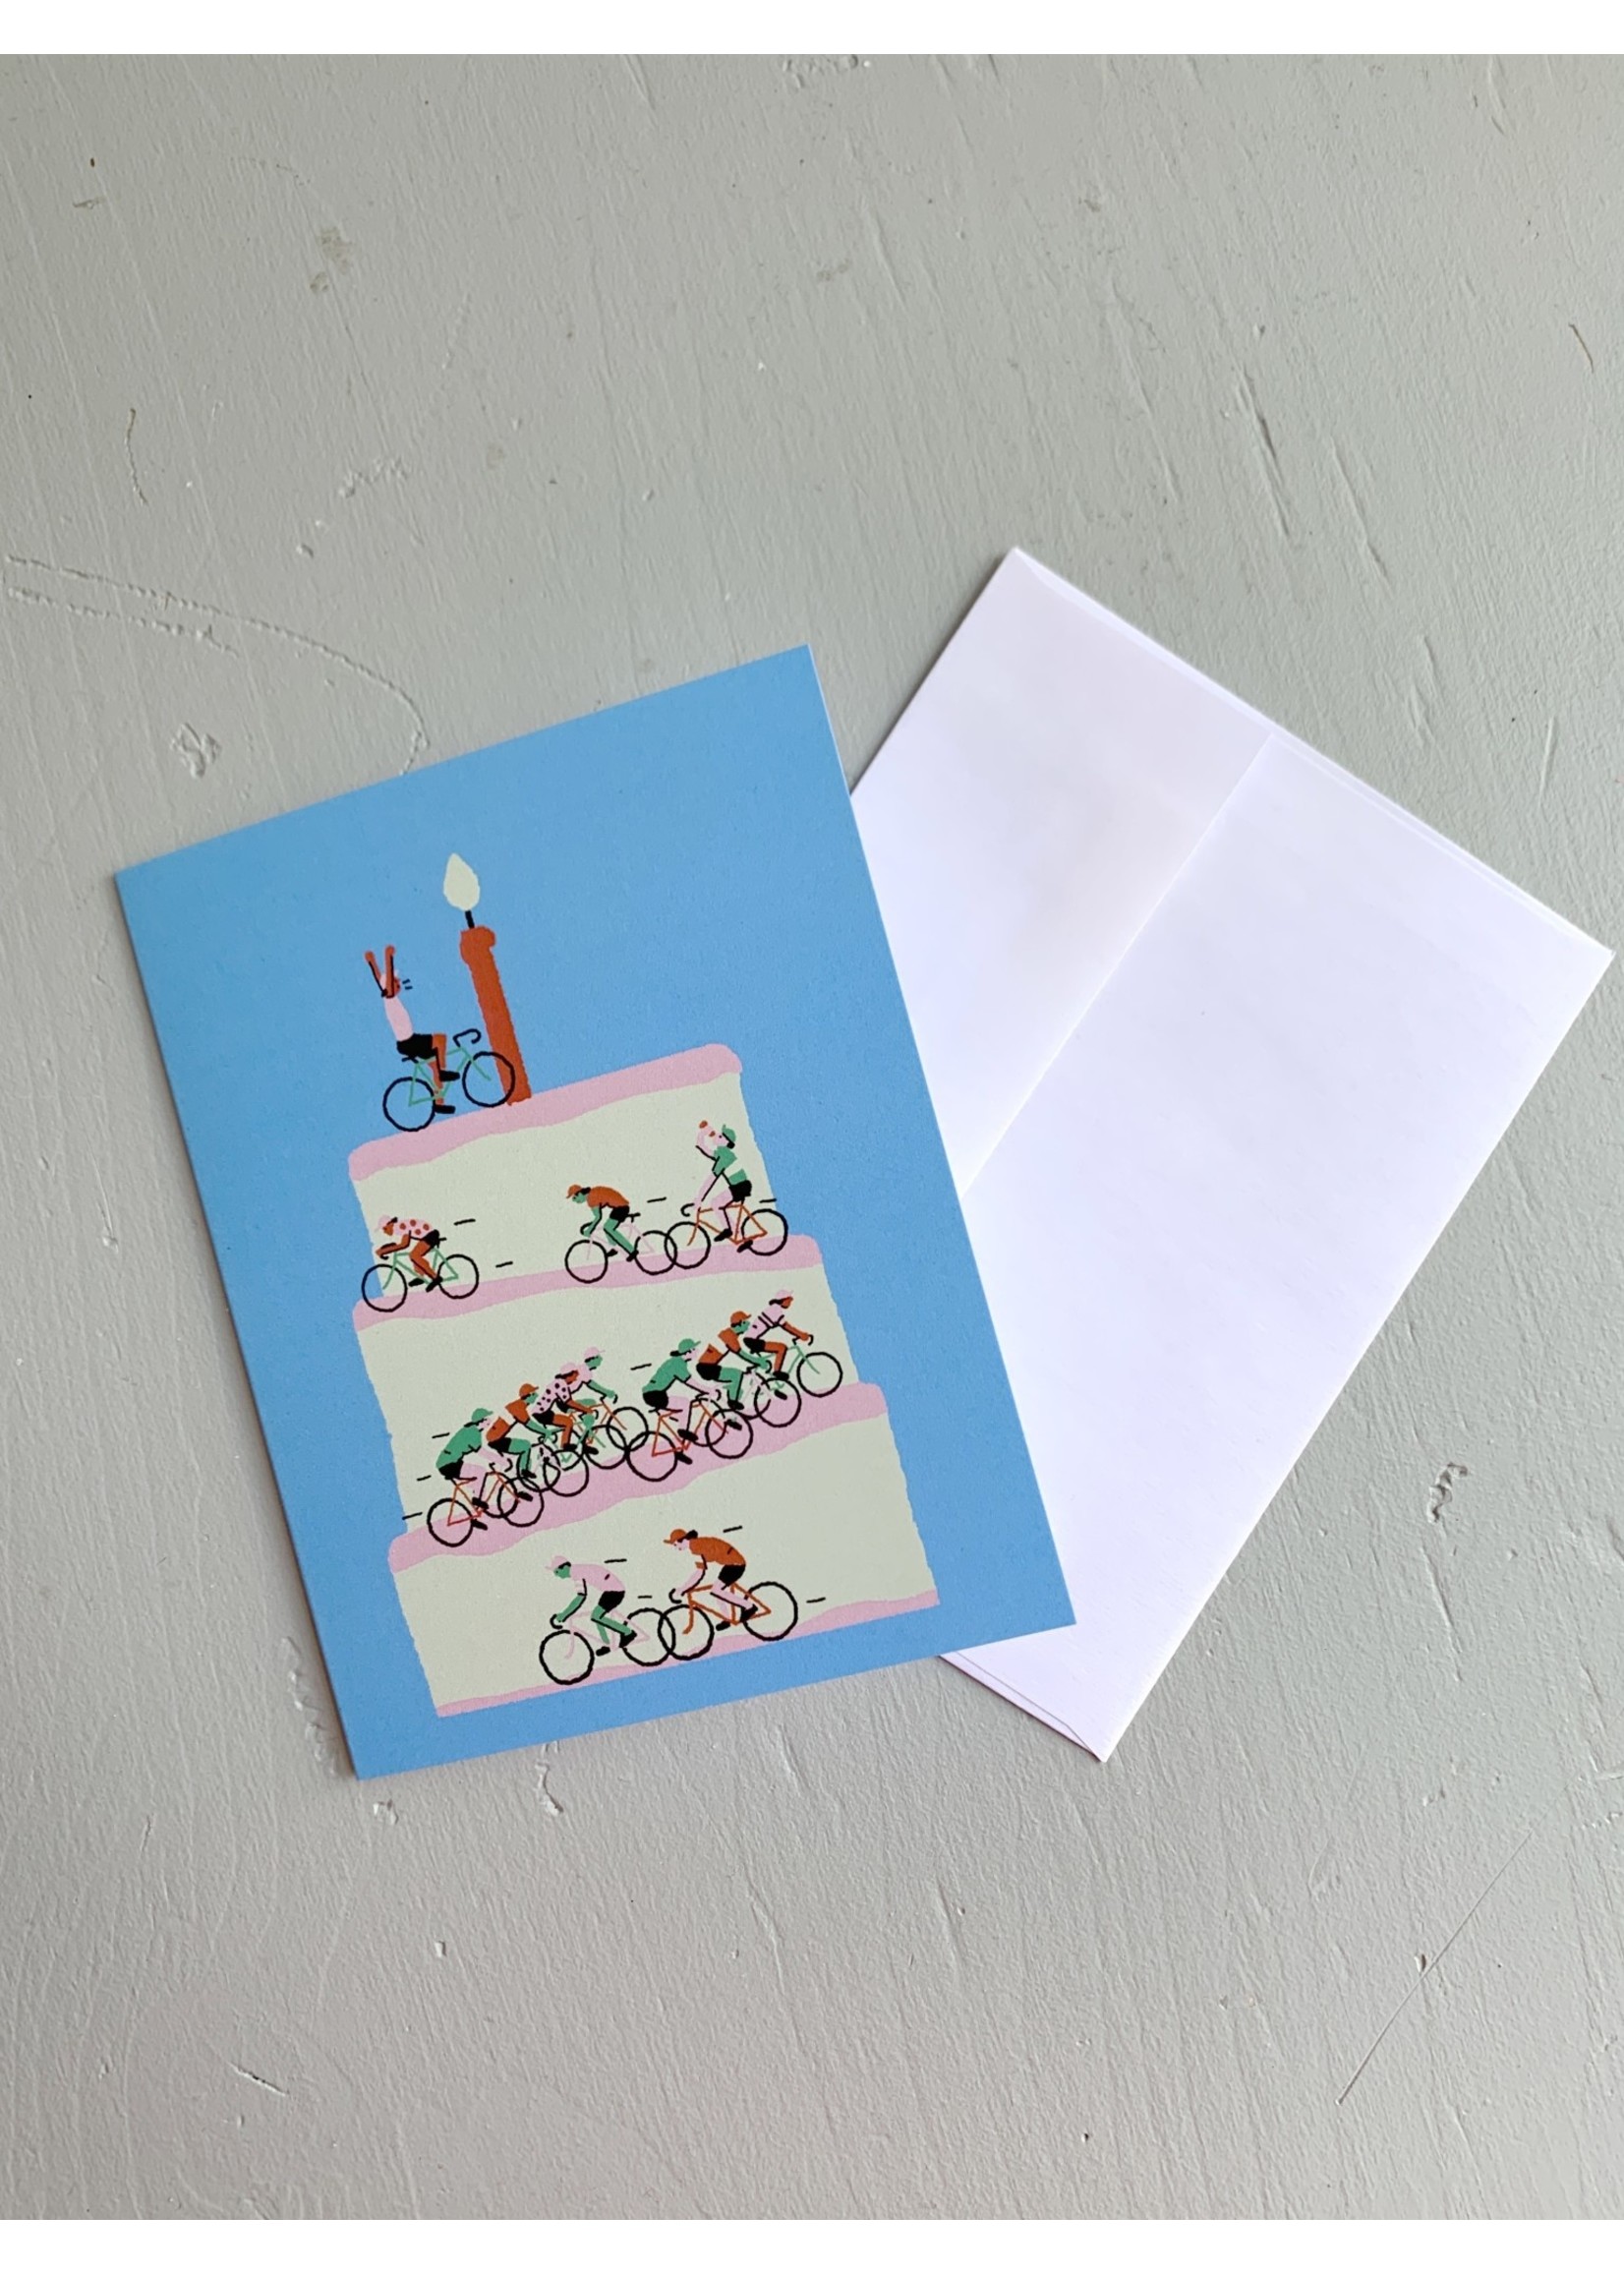 TOUTE Greeting Cards by Vincent Toutou